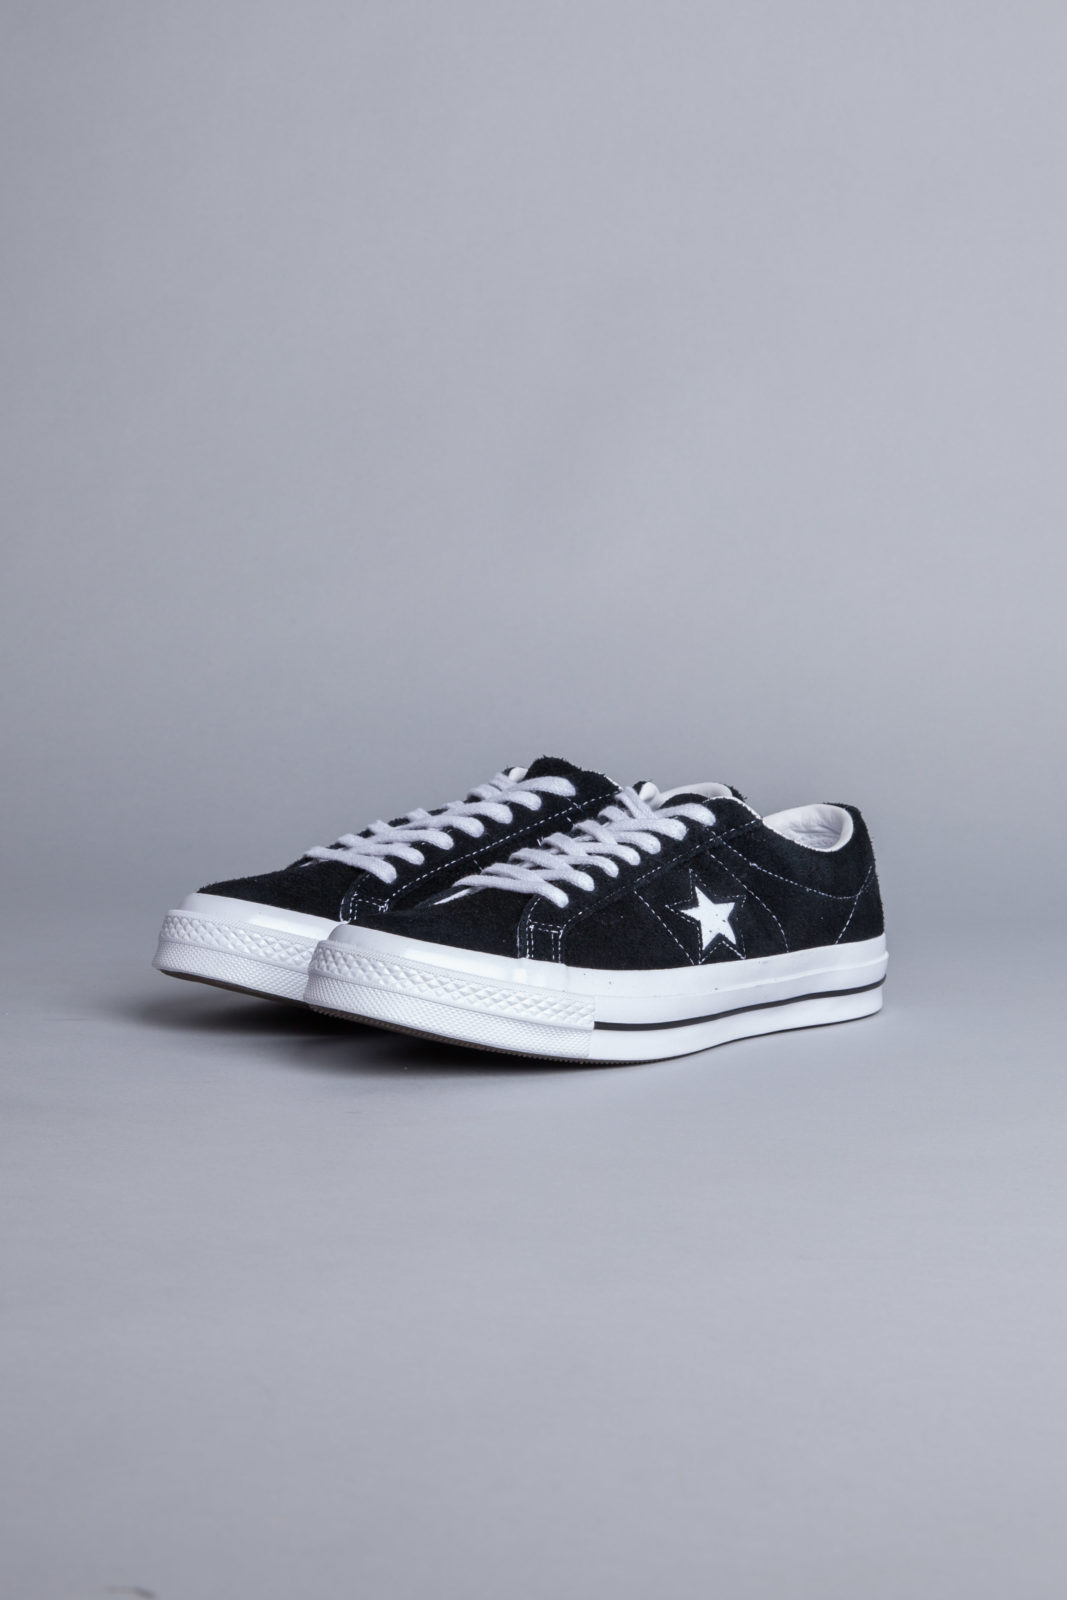 Converse One Star OX Black Sneakers 